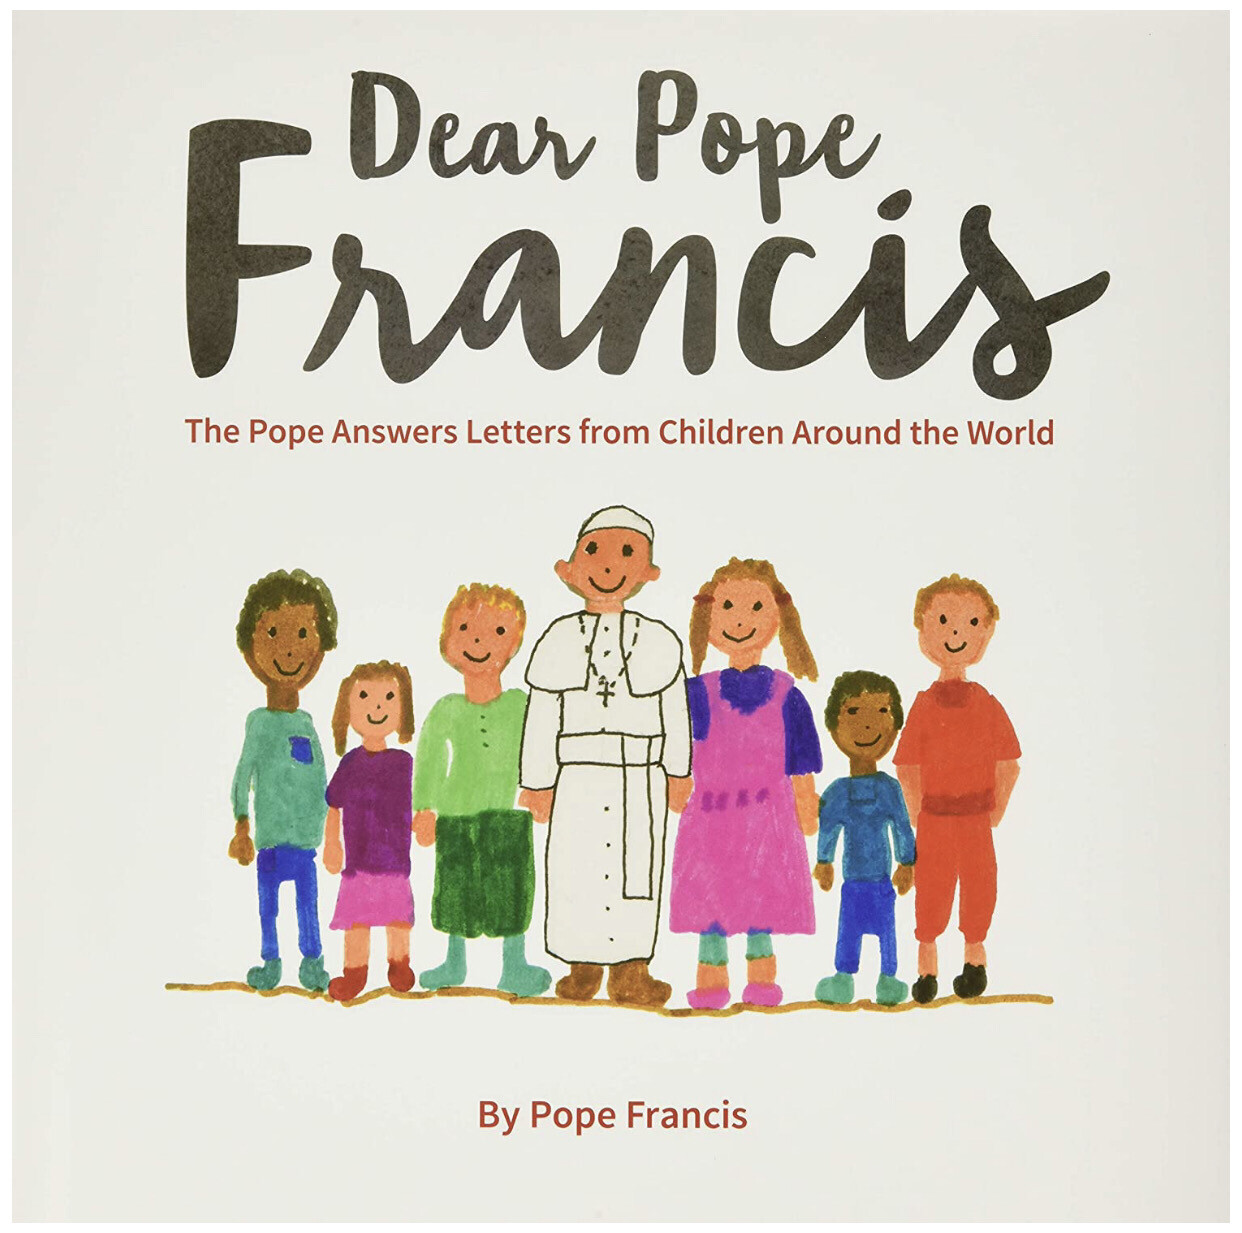 Dear Pope Francis by Pope Francis